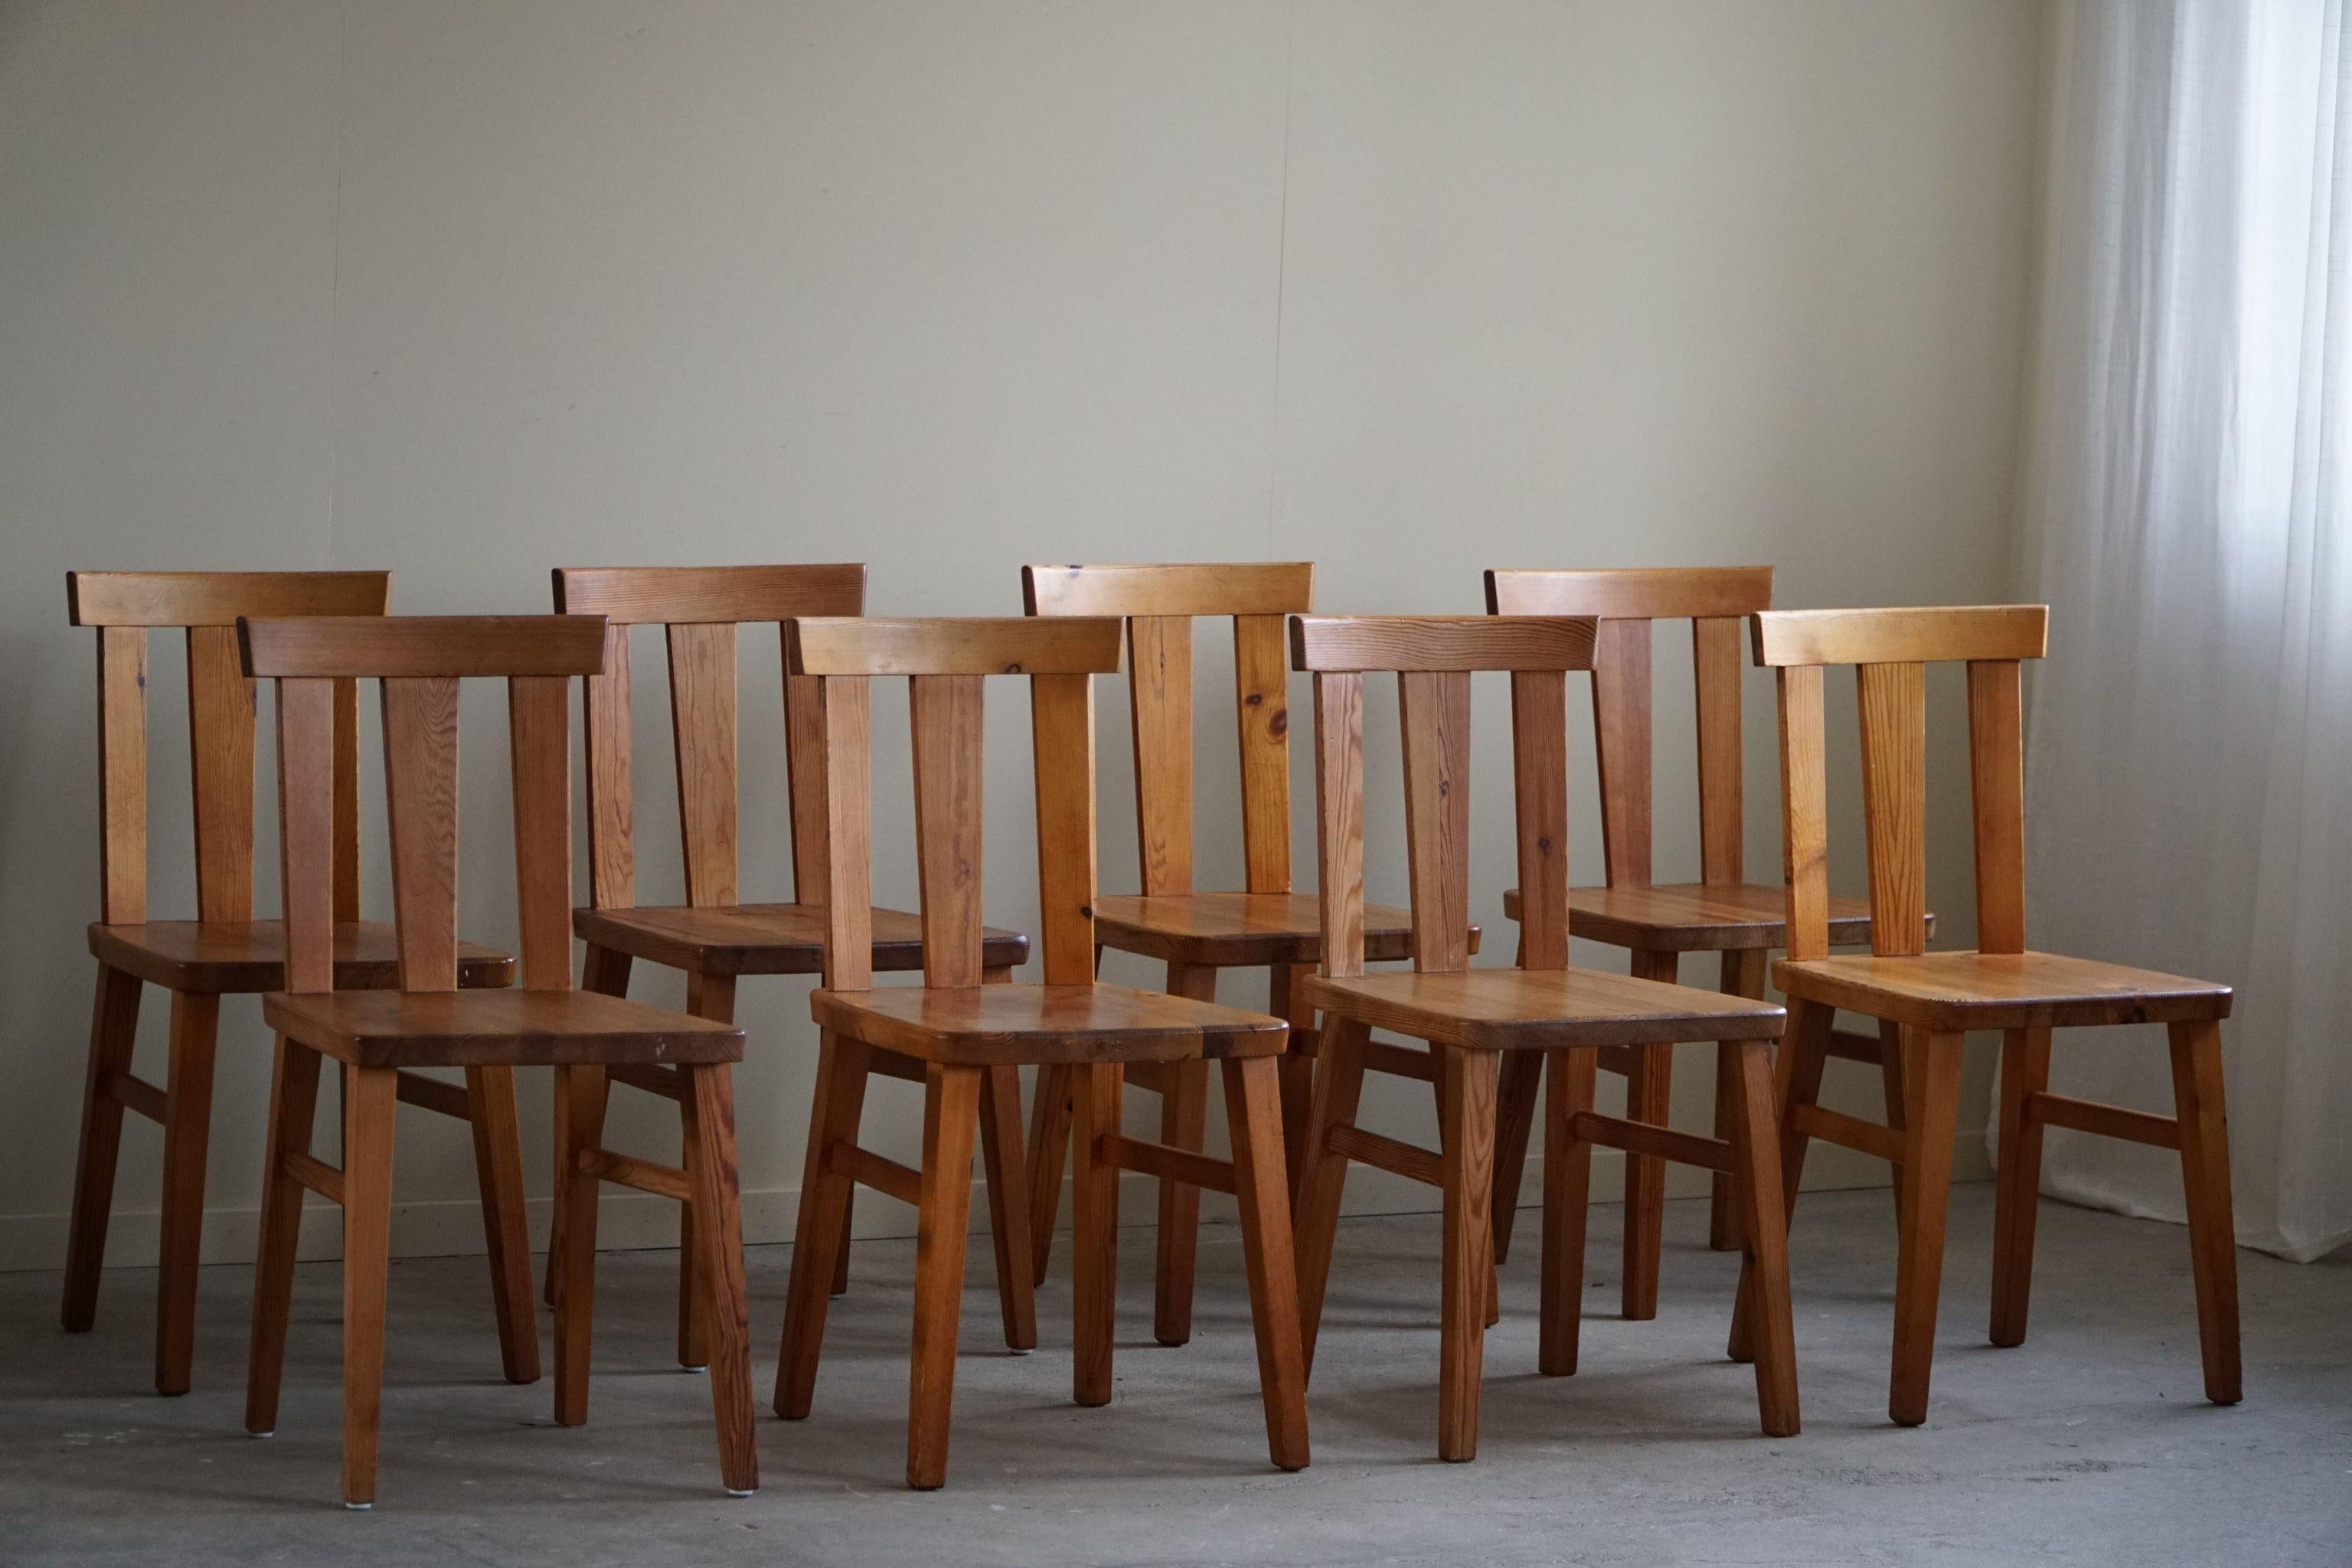 20th Century Swedish Modern, Set of 8 Chairs in Solid Pine, Axel Einar Hjorth Style, 1950s